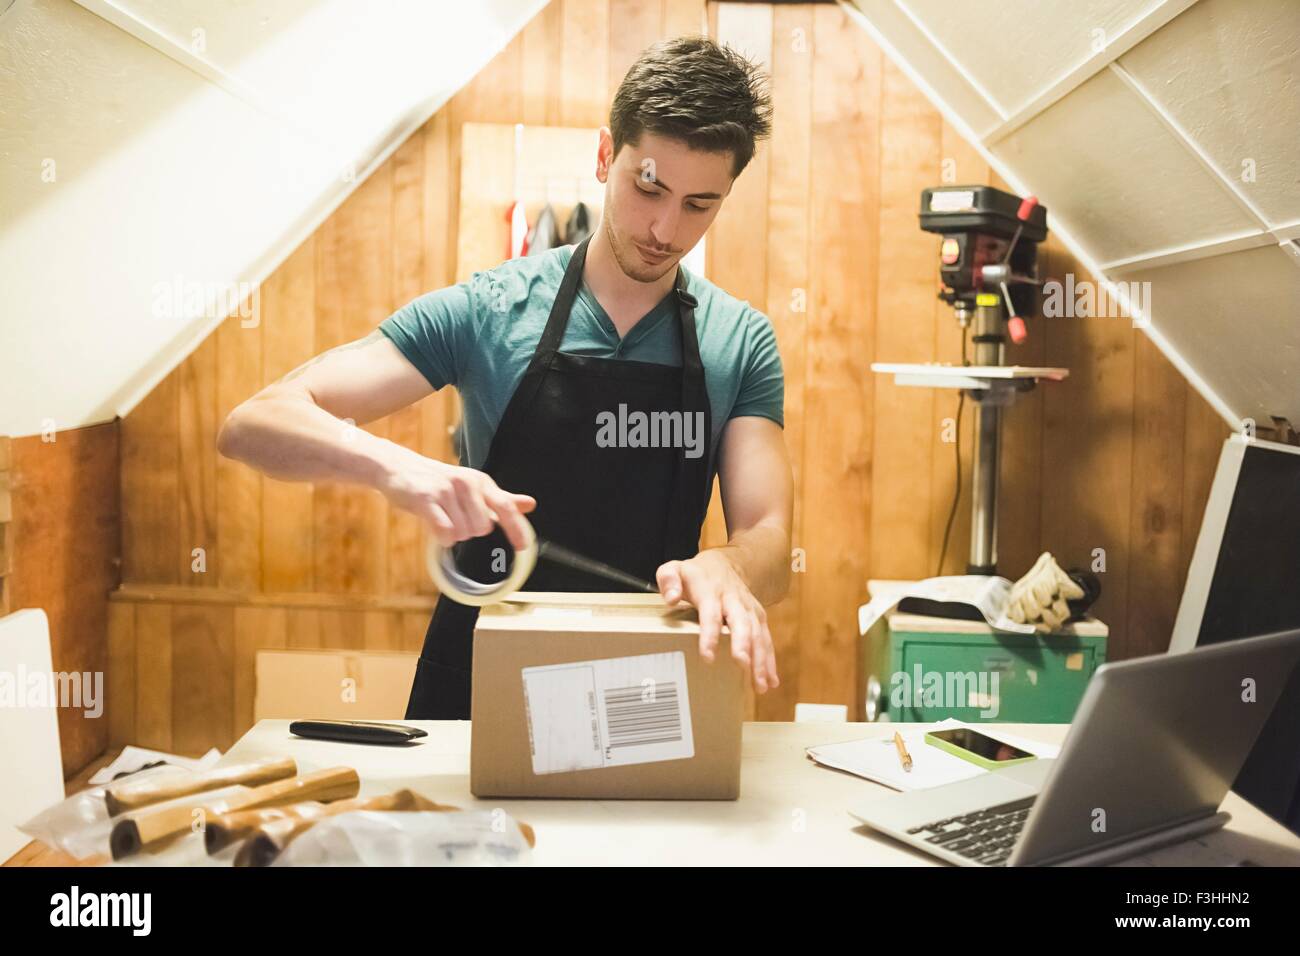 Young man using sticking tape to prepare package for delivery Stock Photo